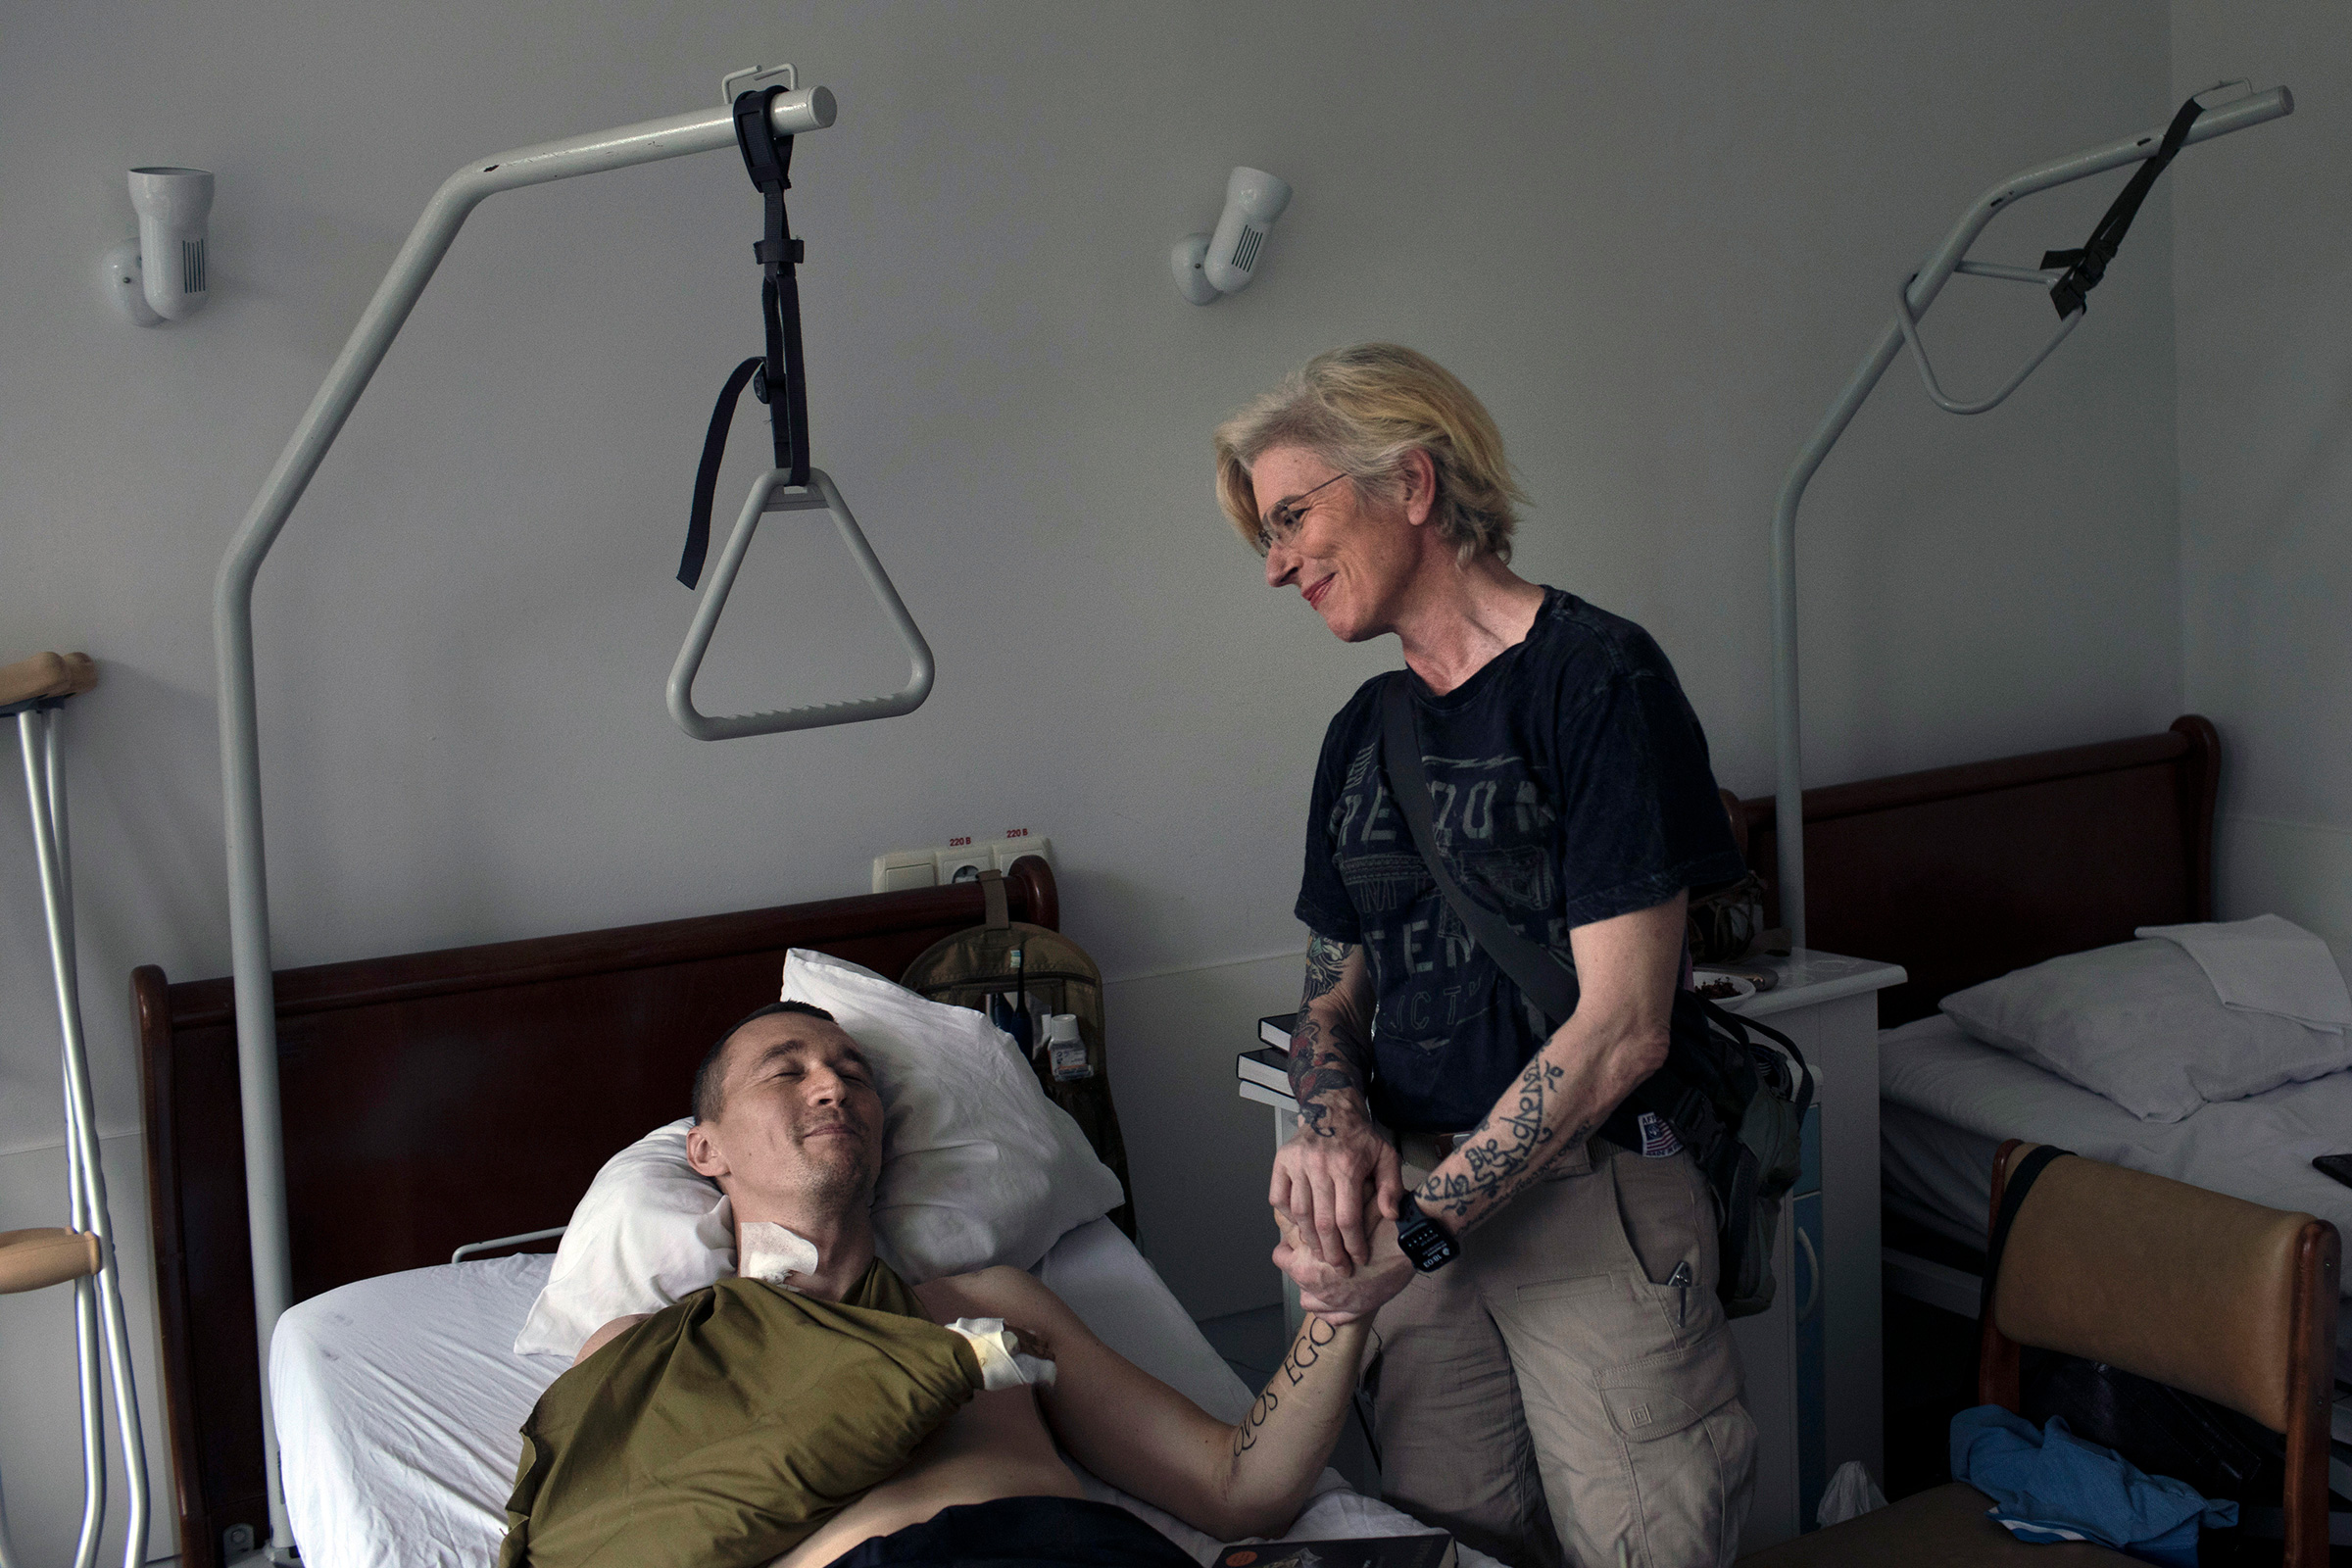 Julia Payevska, a medic who was imprisoned by Russian troops while working in Mariupol, visits her friend Yuriy Hudymenko, a wounded Ukrainian soldier, at the hospital in Kyiv where he has been recovering. (Emile Ducke—The New York Times/Redux)